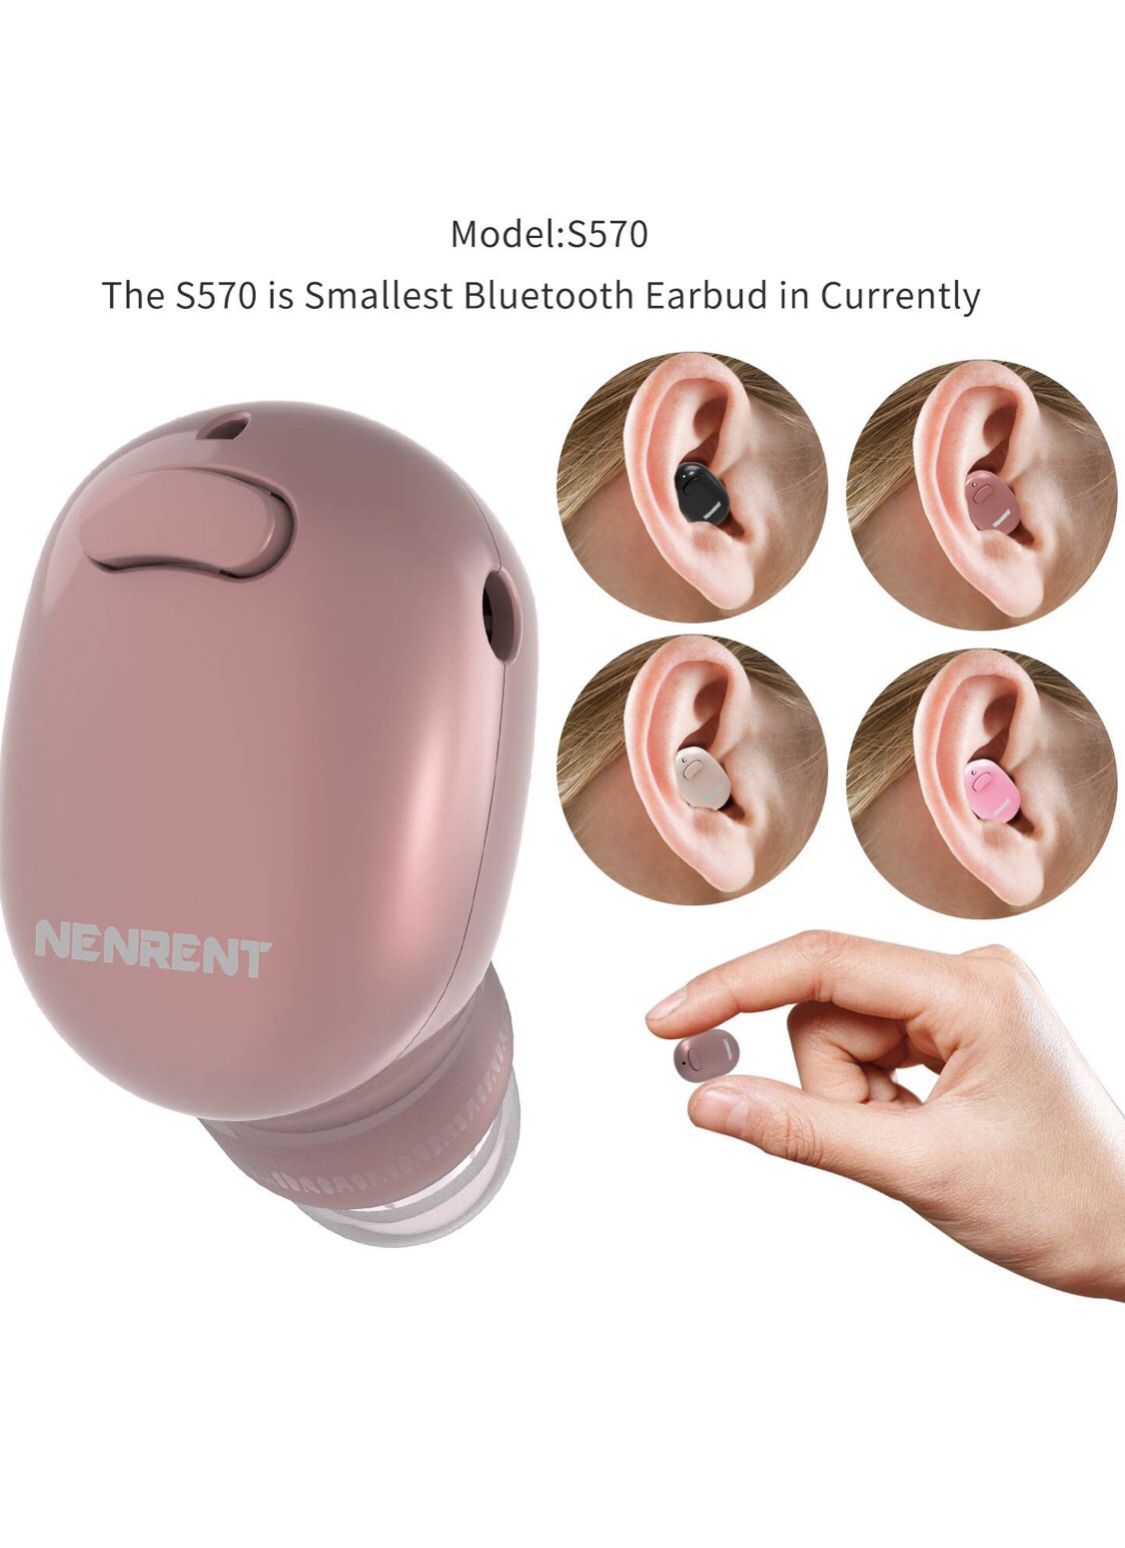 NENRENT S570 Bluetooth Earbuds,Smallest Mini V4.1 Wireless Bluetooth Earpiece Headset Headphone Earphone with Mic Hands-Free Calls for iPhone iPad Sa